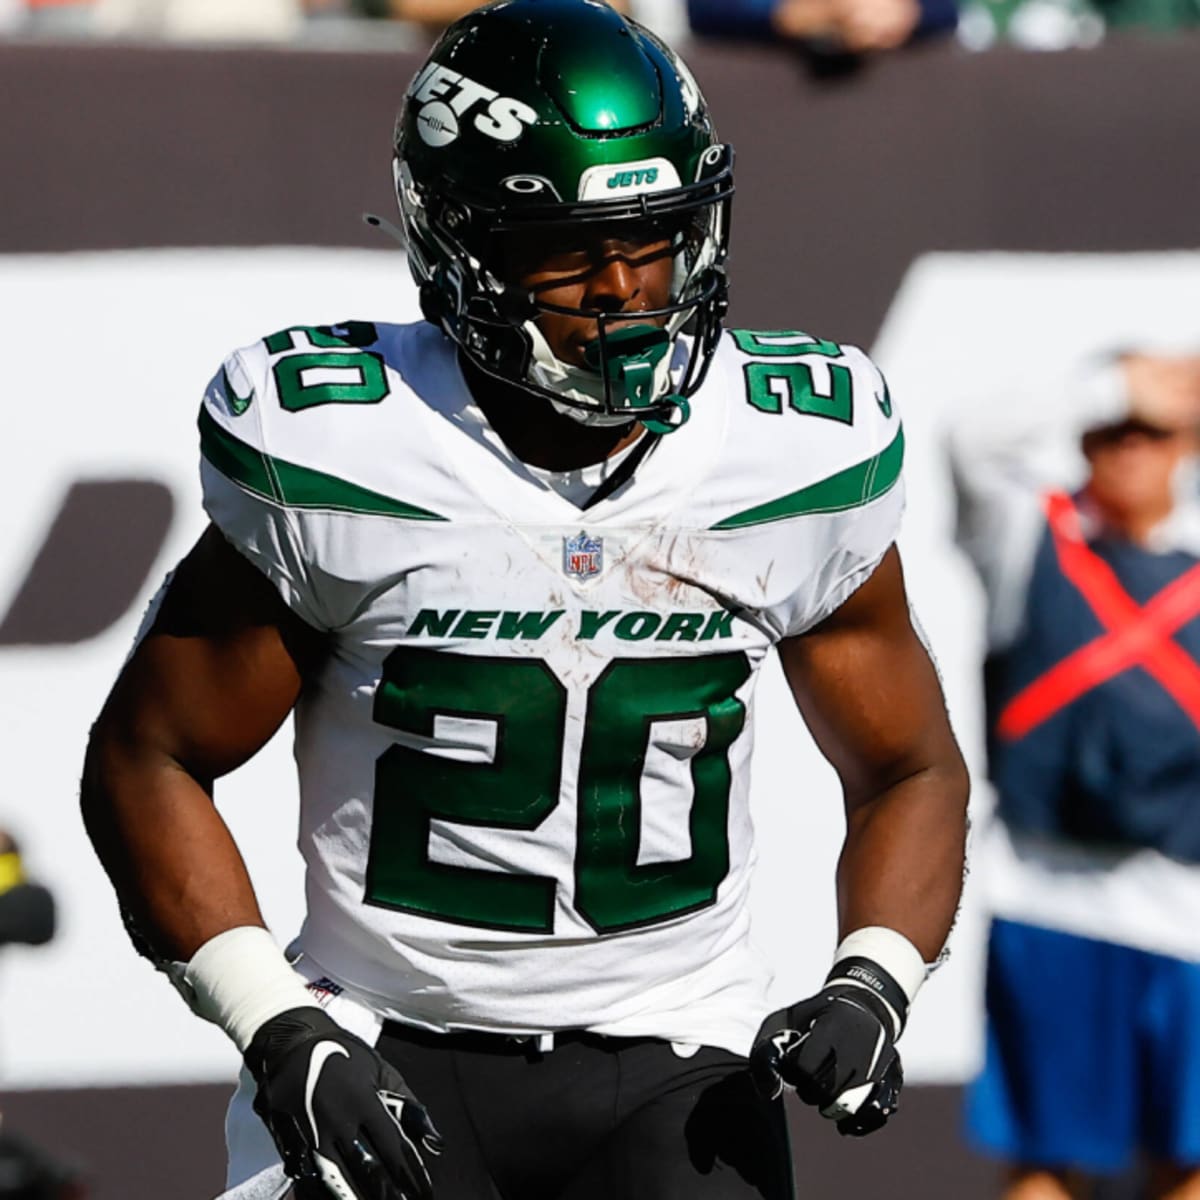 Jets beat Broncos but lose rookie RB Hall to knee injury